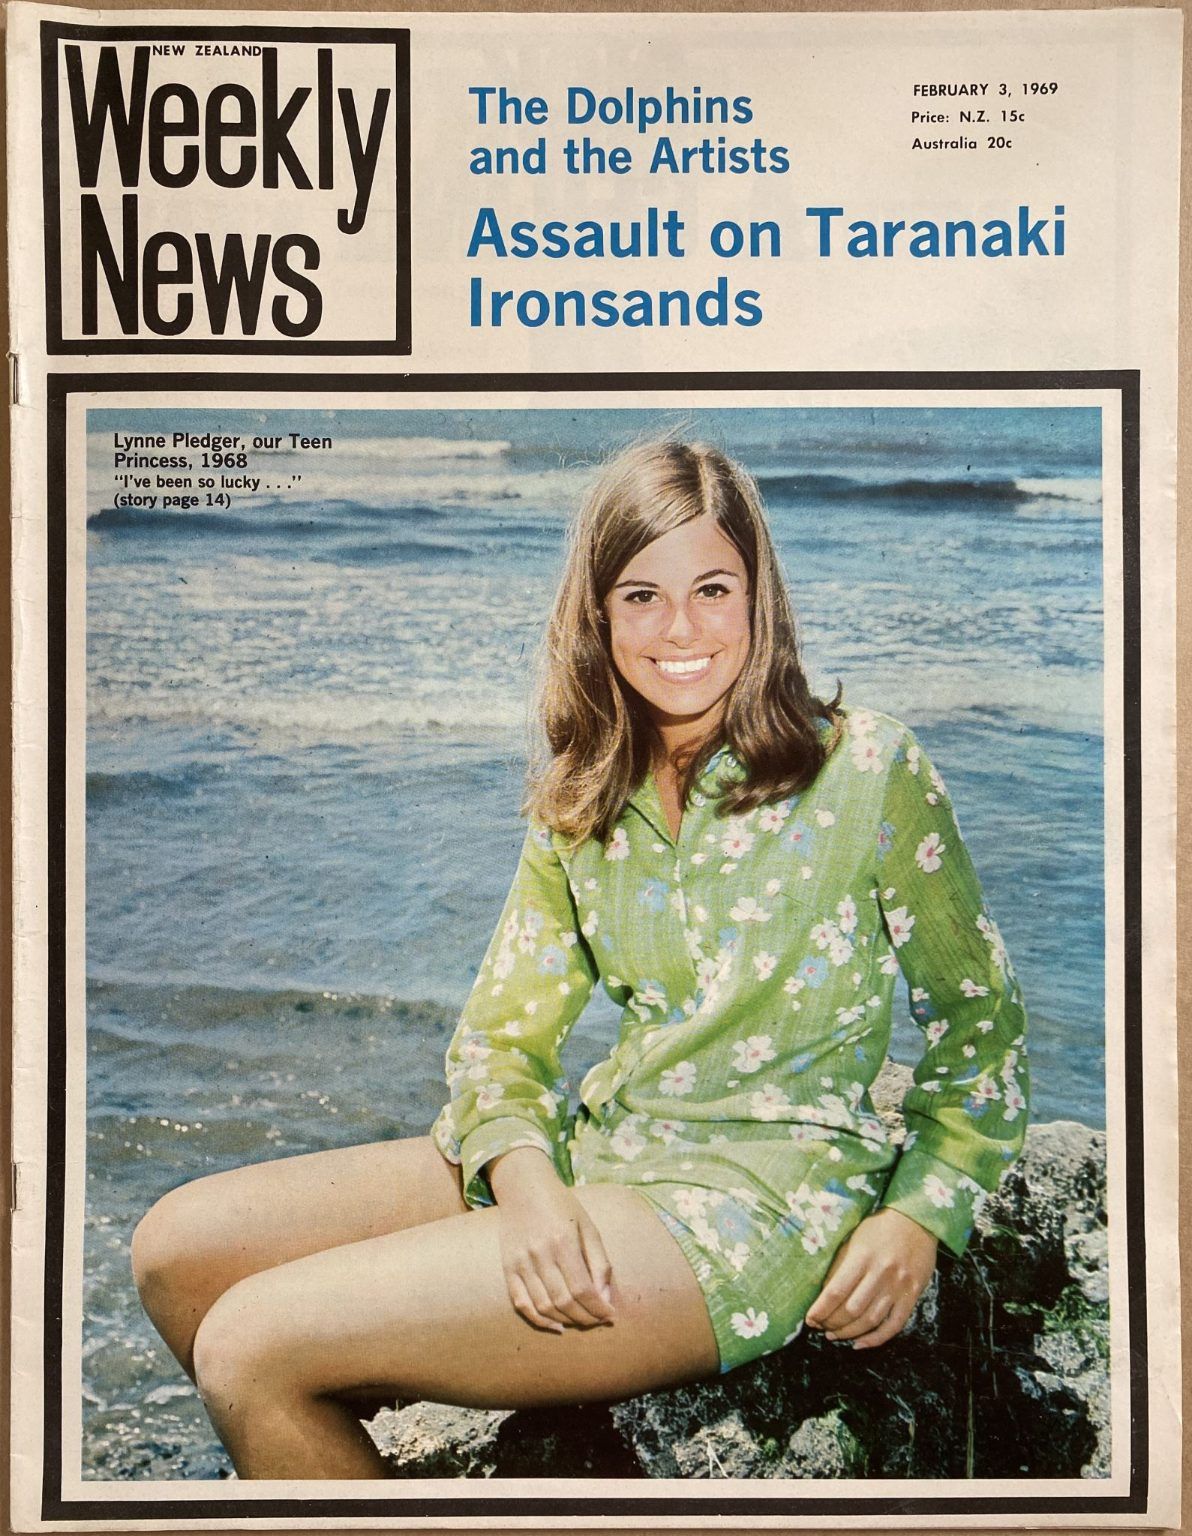 OLD NEWSPAPER: New Zealand Weekly News, No. 5488, 3 February 1969